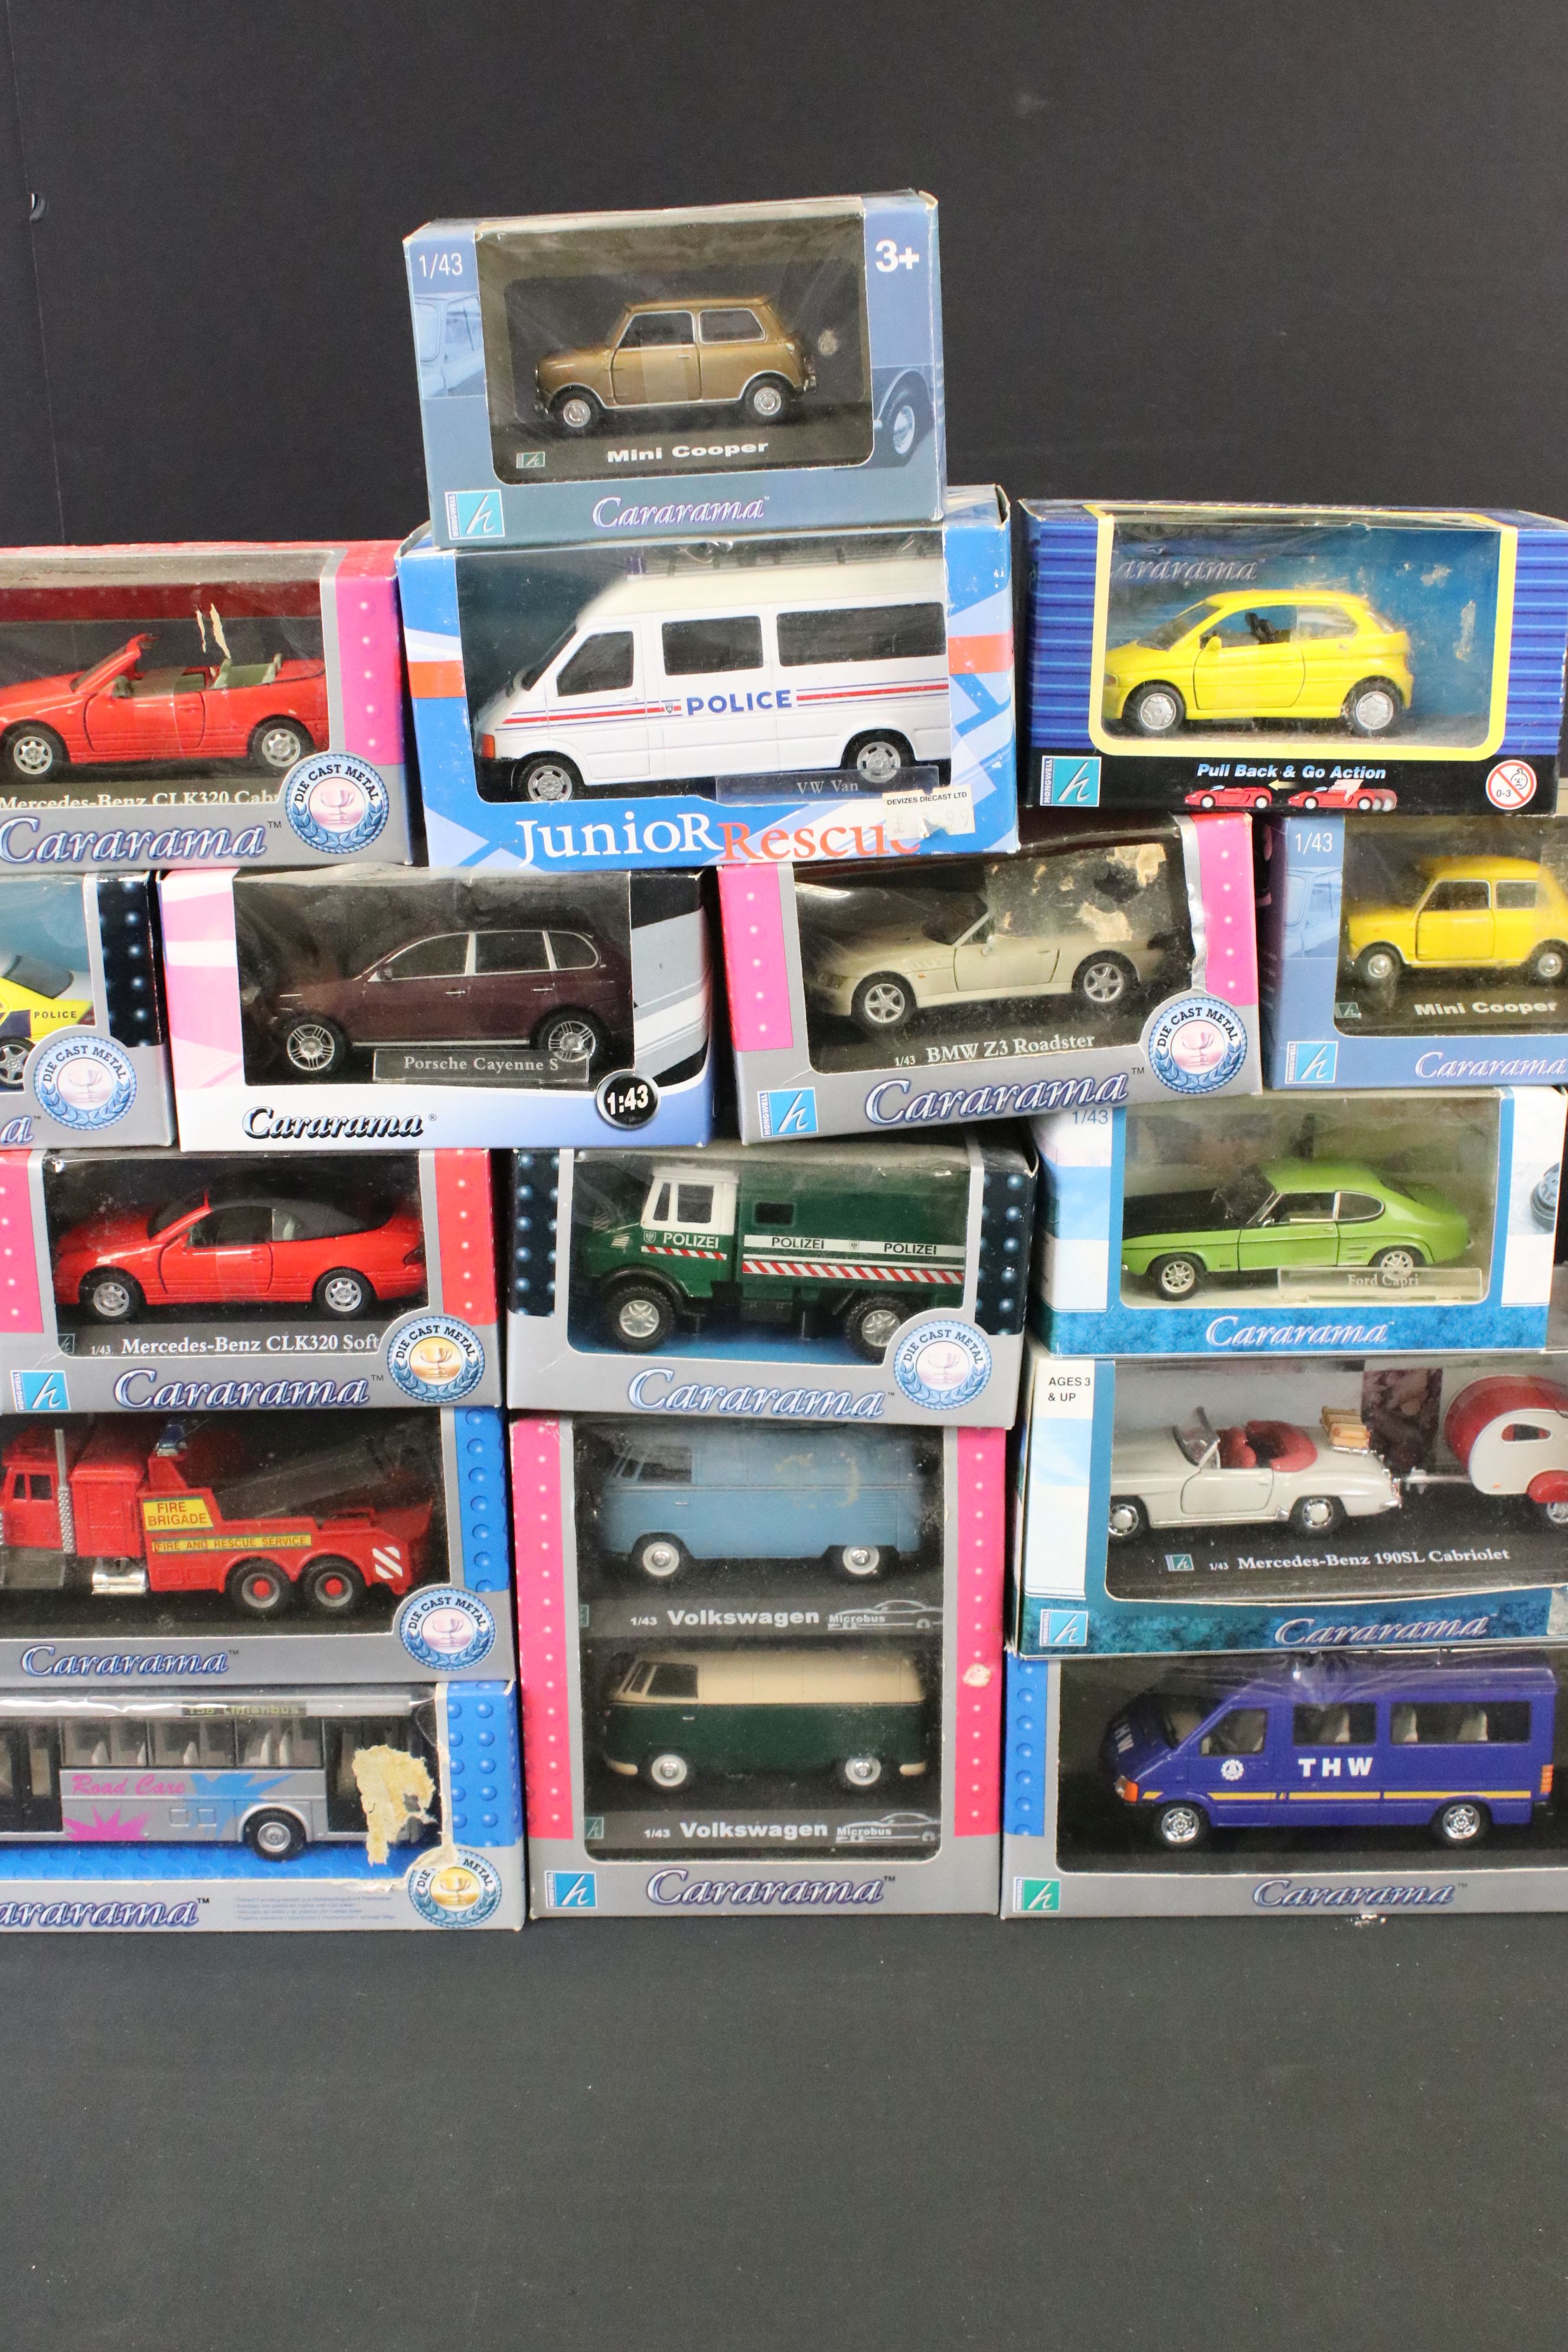 37 Boxed Cararama diecast models to include No. 252 1/43 Volkswagen Microbus multi-model set, No. - Image 7 of 8